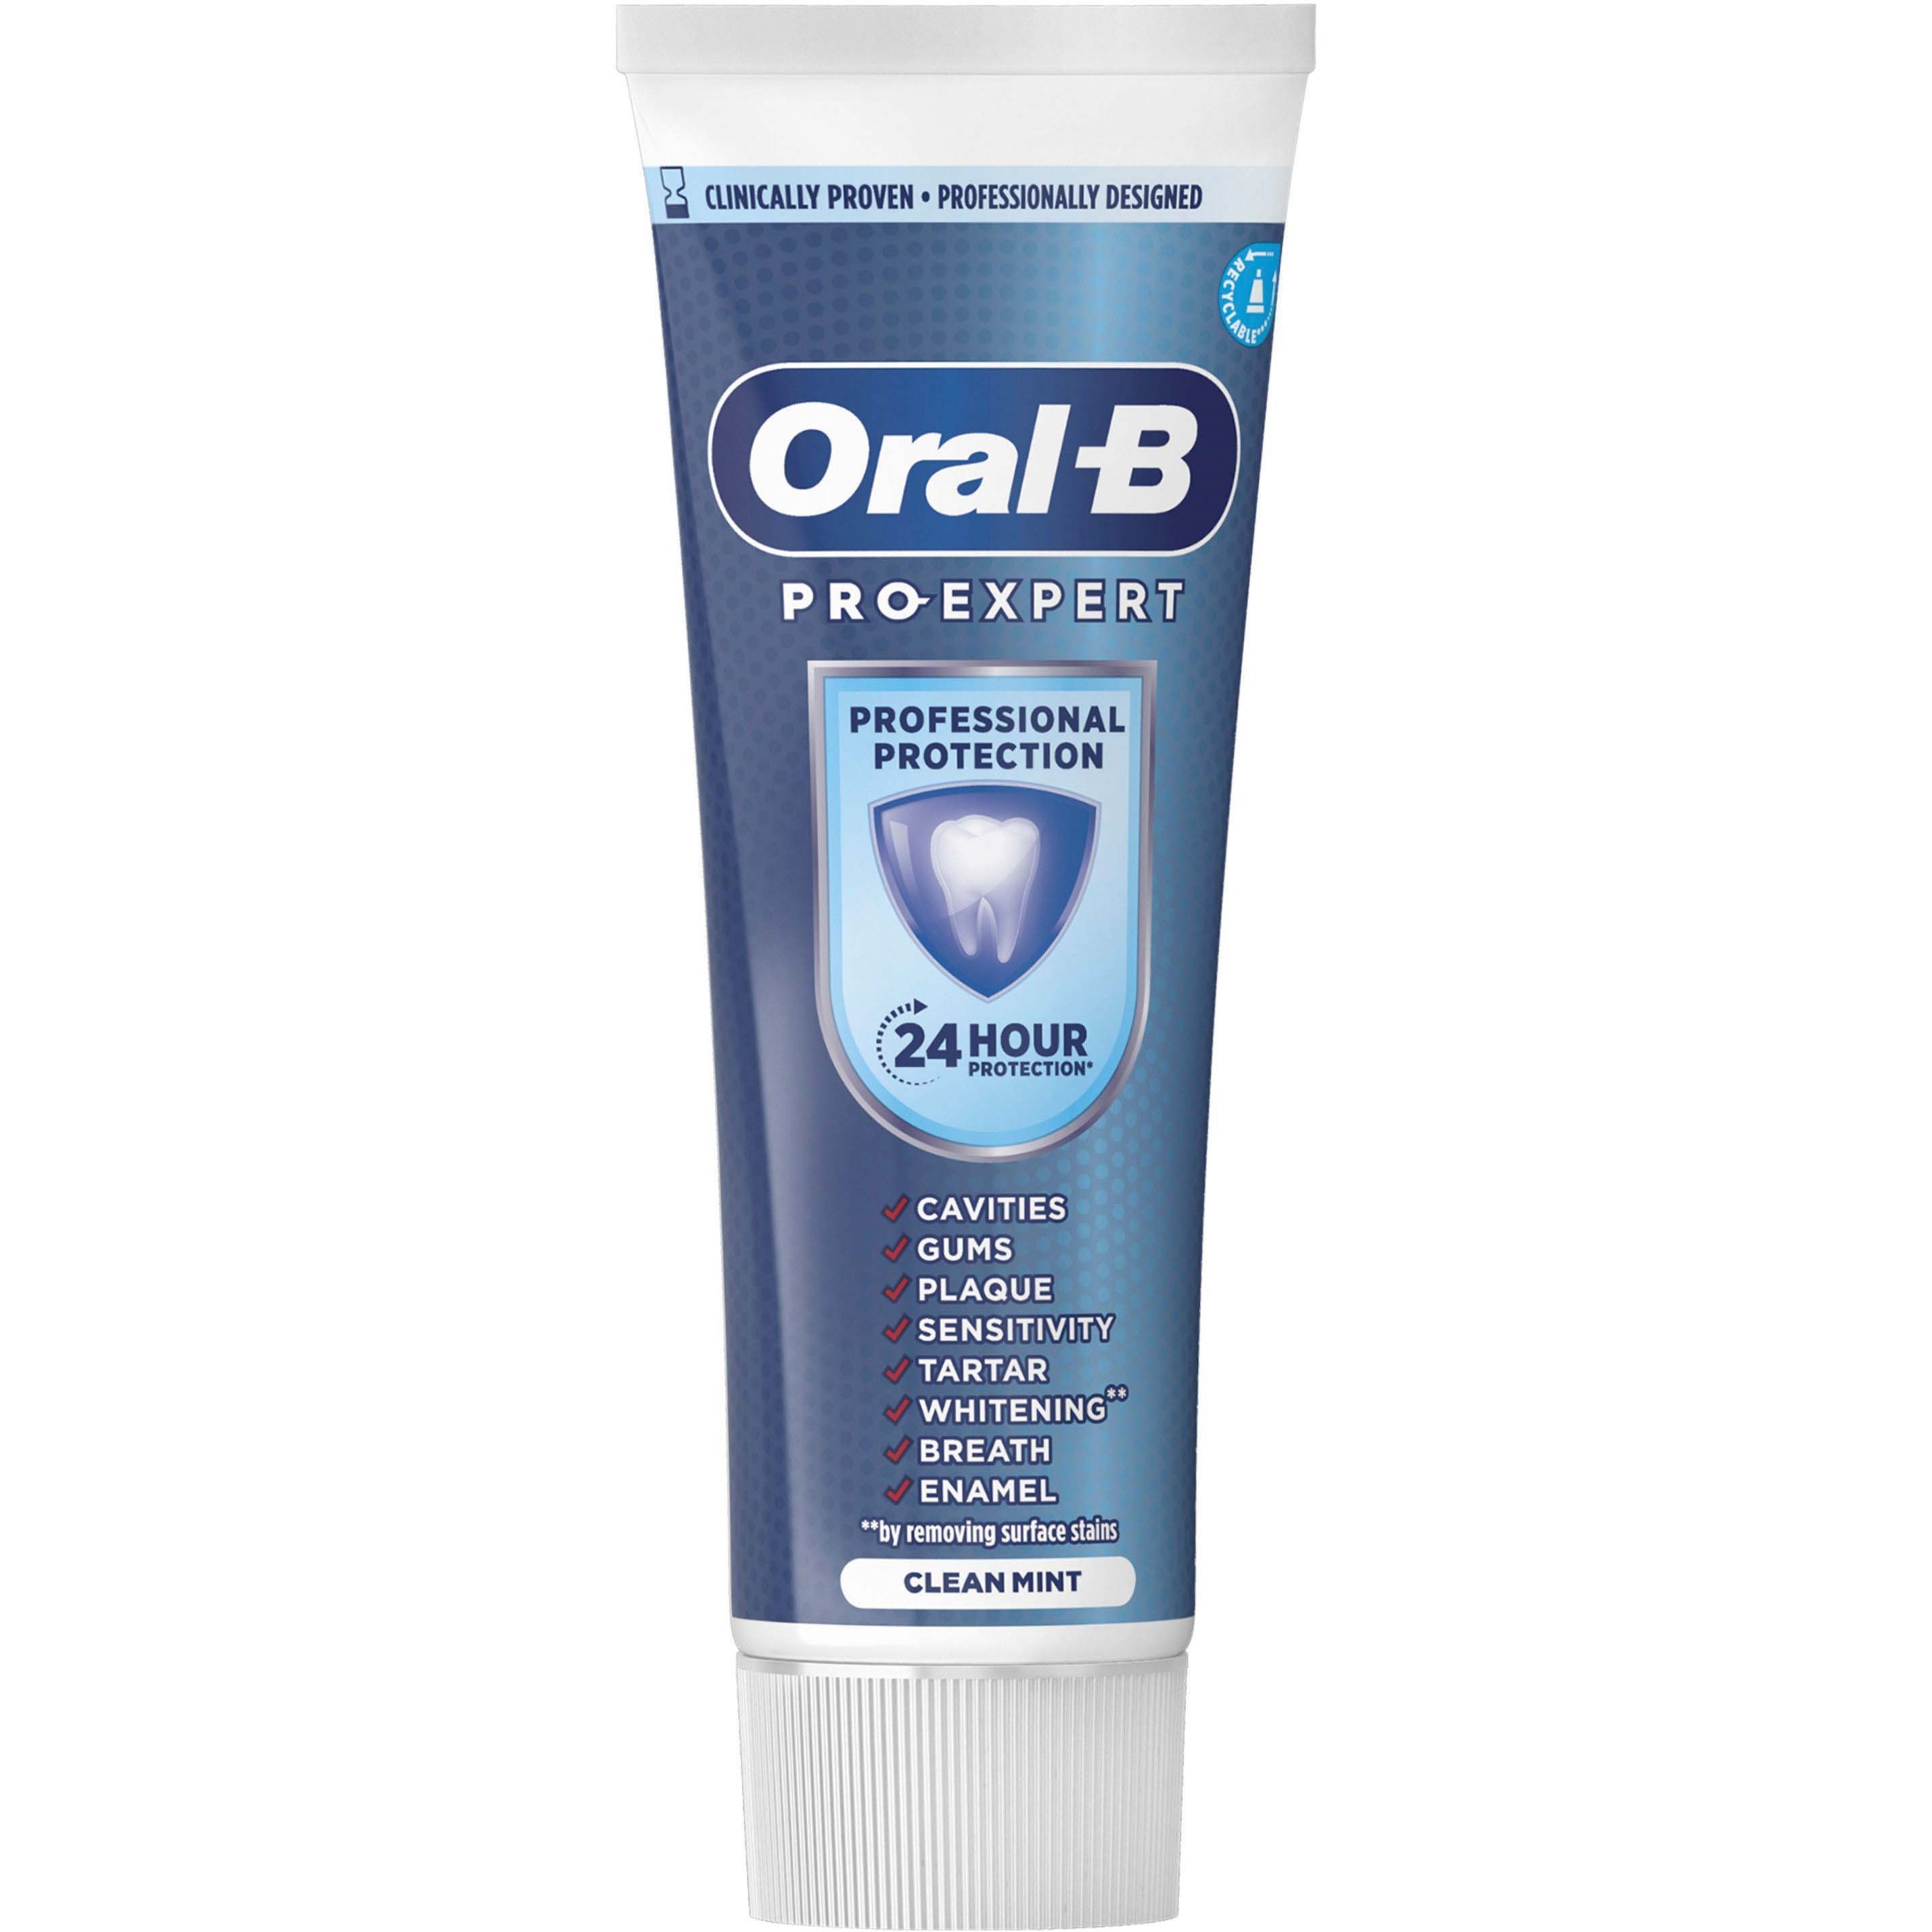 Oral B Pro-Expert Advanced Science Professional Protection Toothpaste